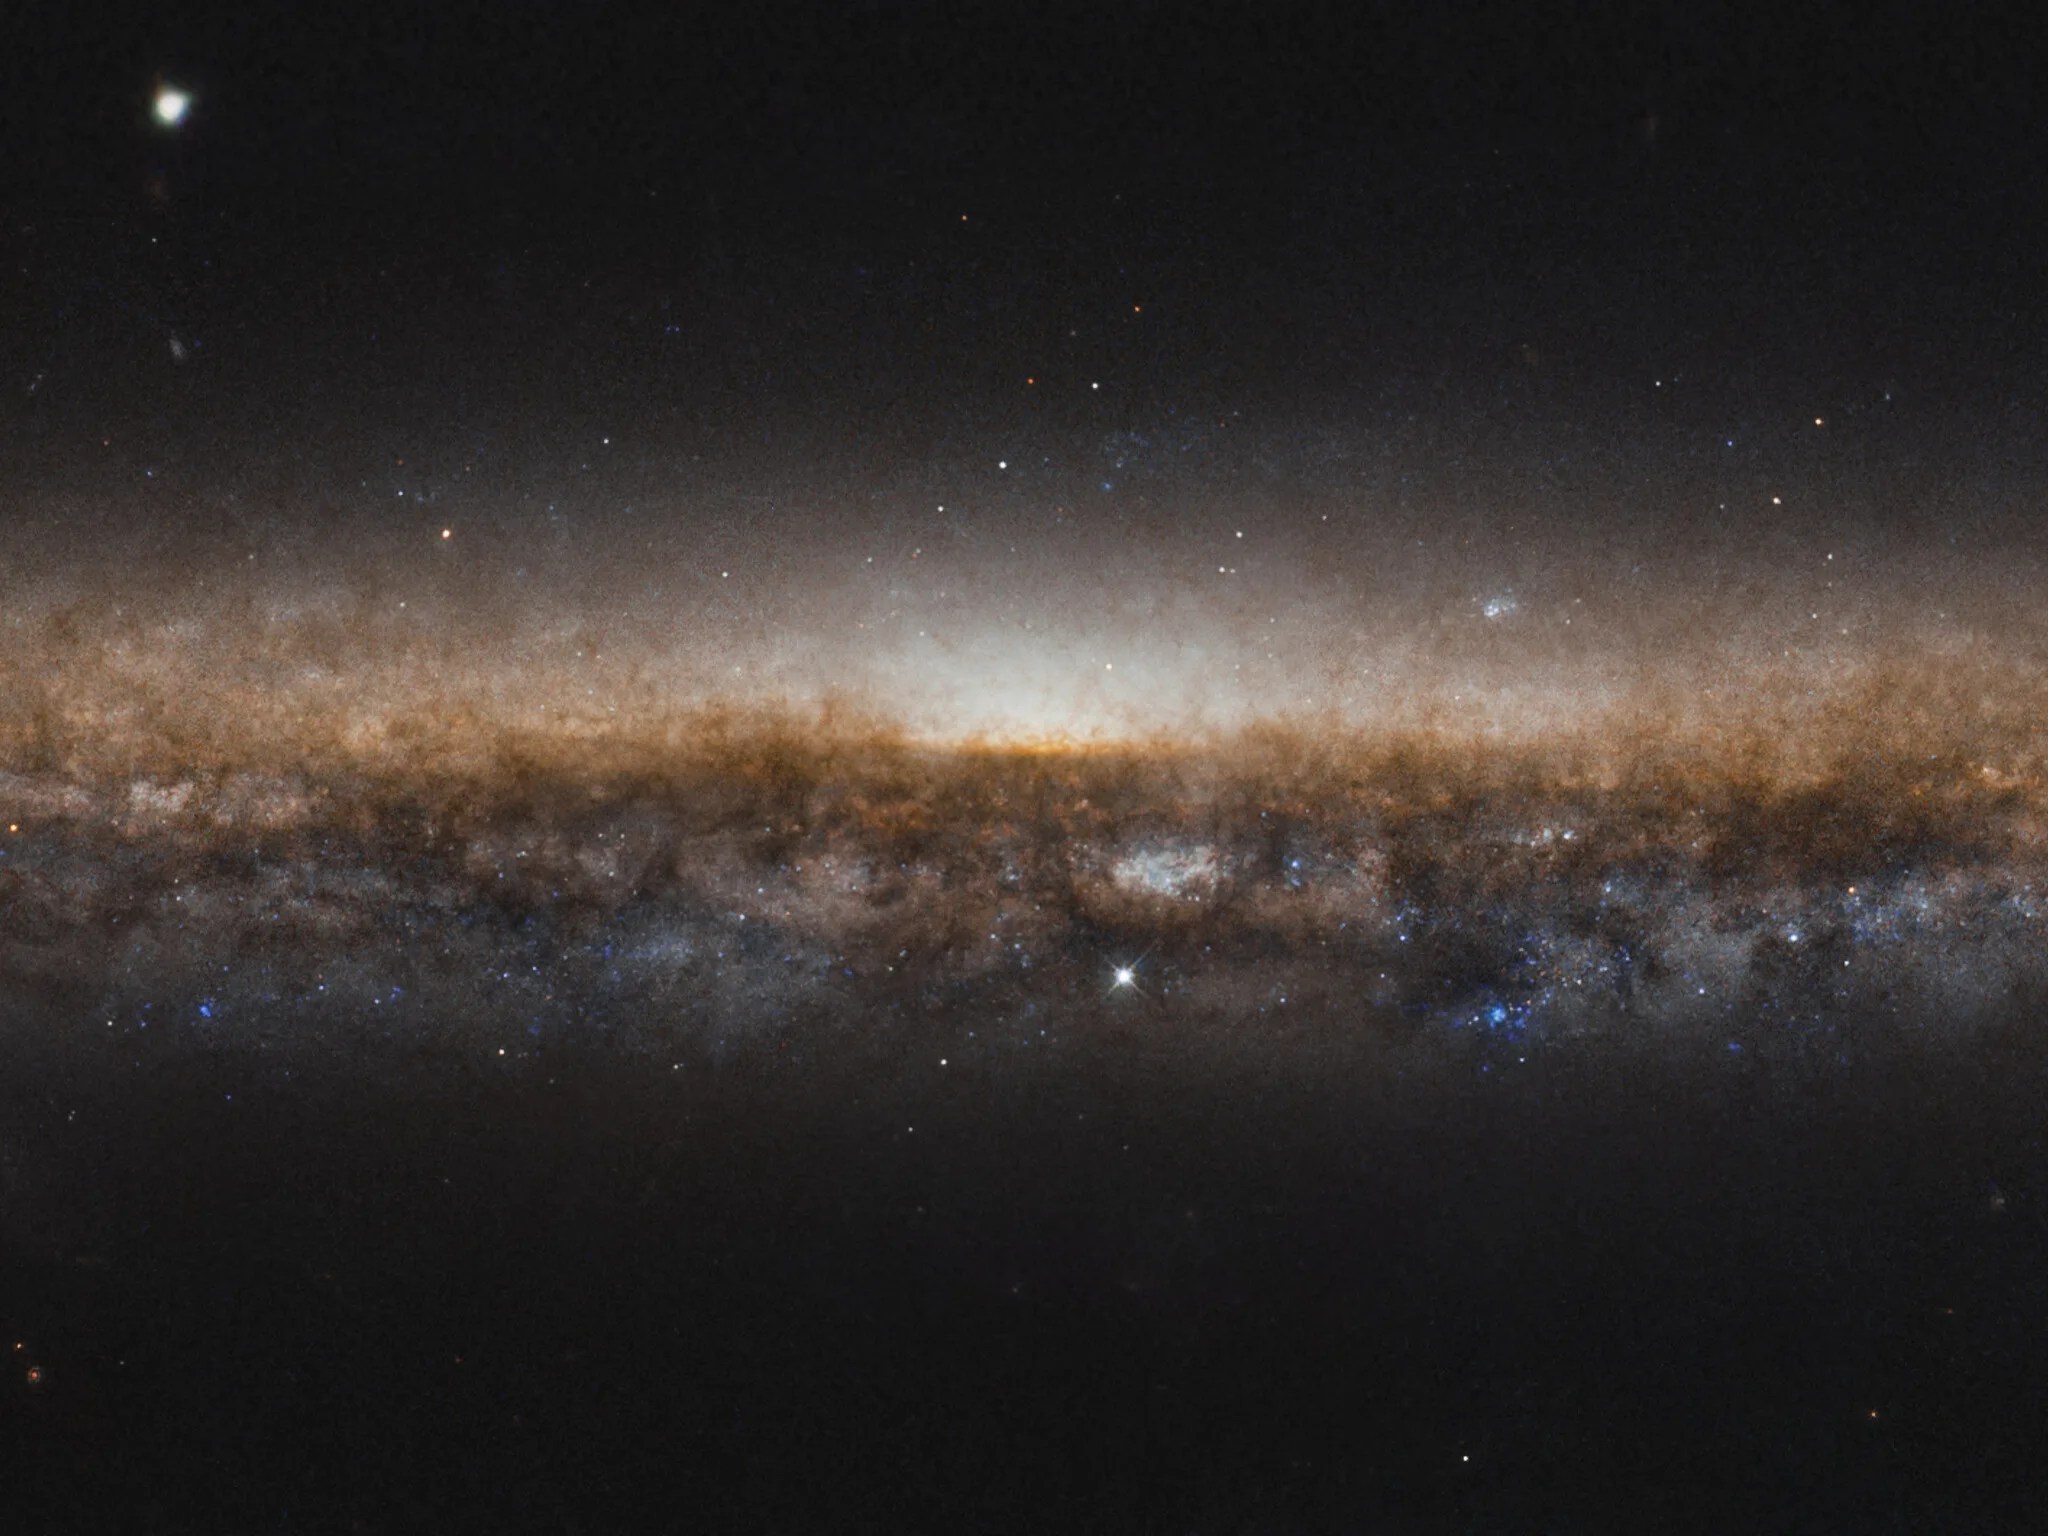 Edge-on view of the stars in galaxy ngc 5907, bright against the backdrop of space